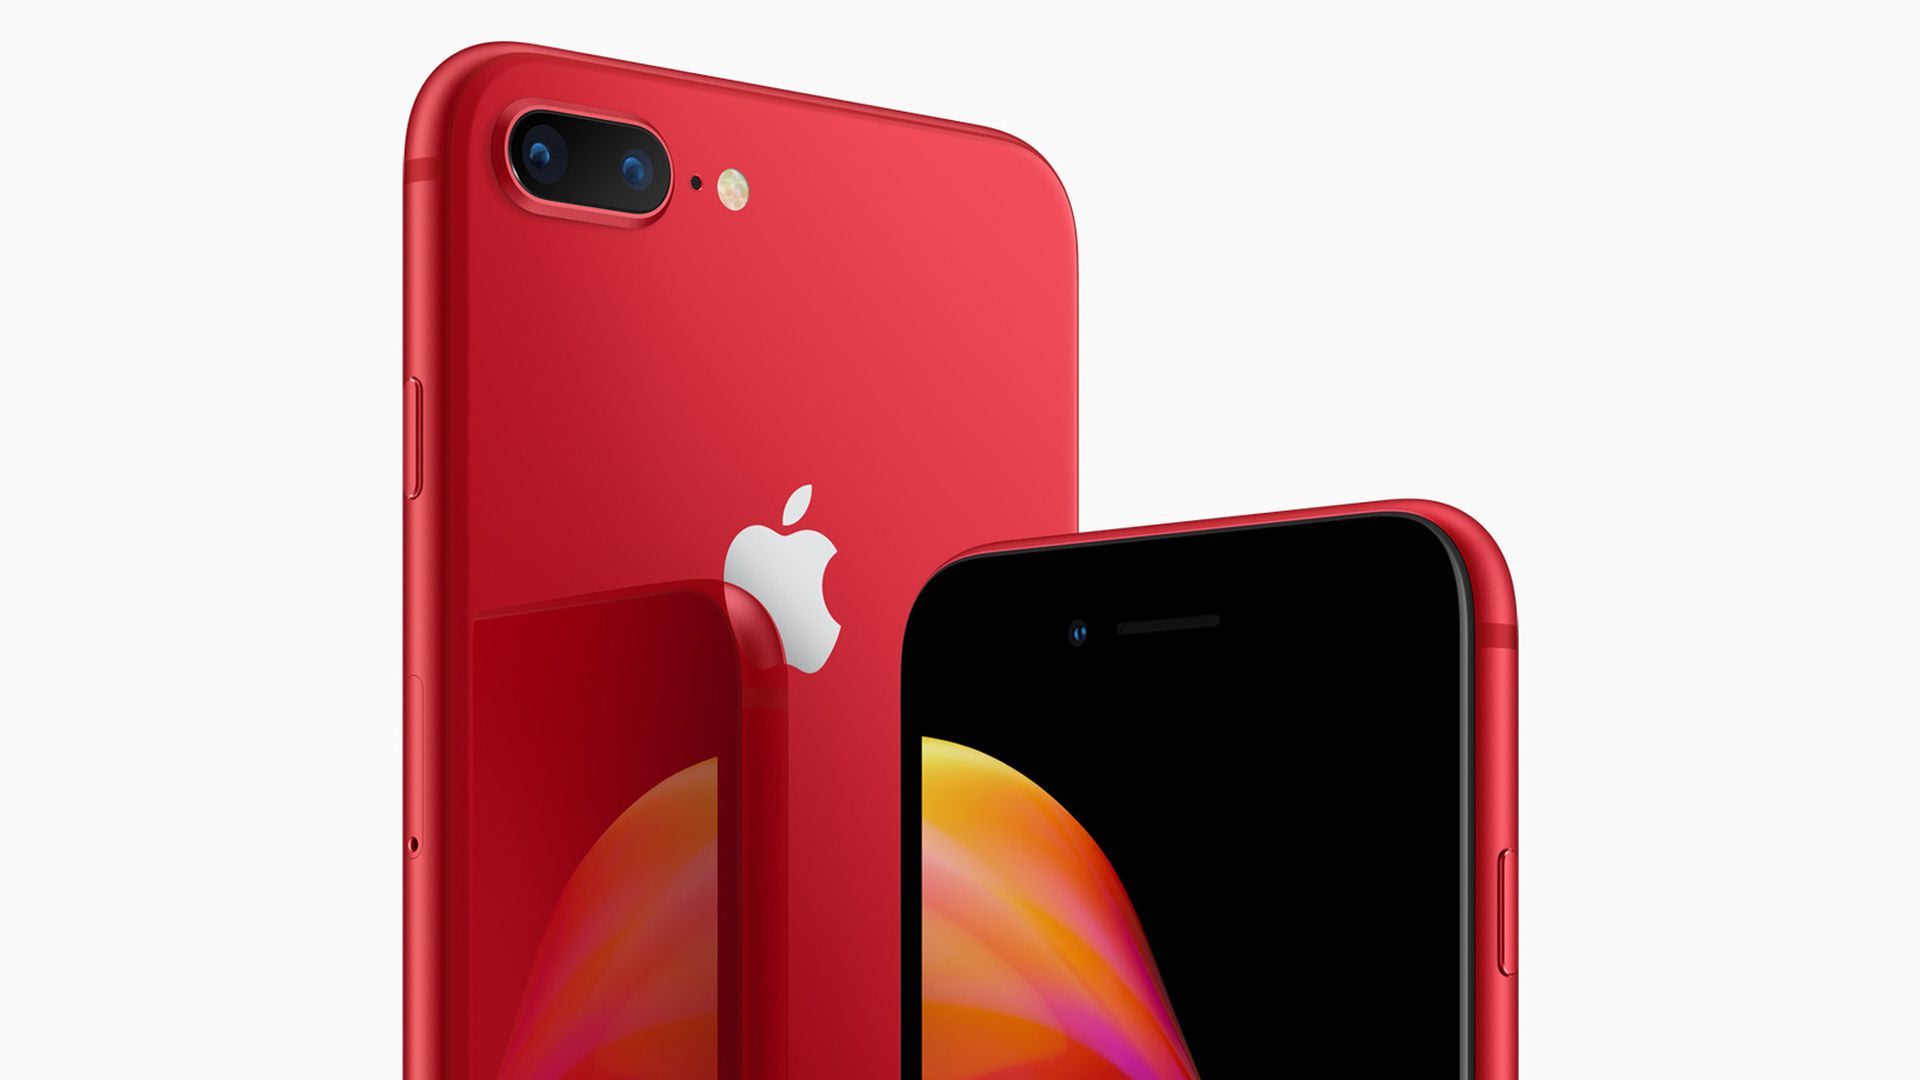 A red Apple iPhone 8